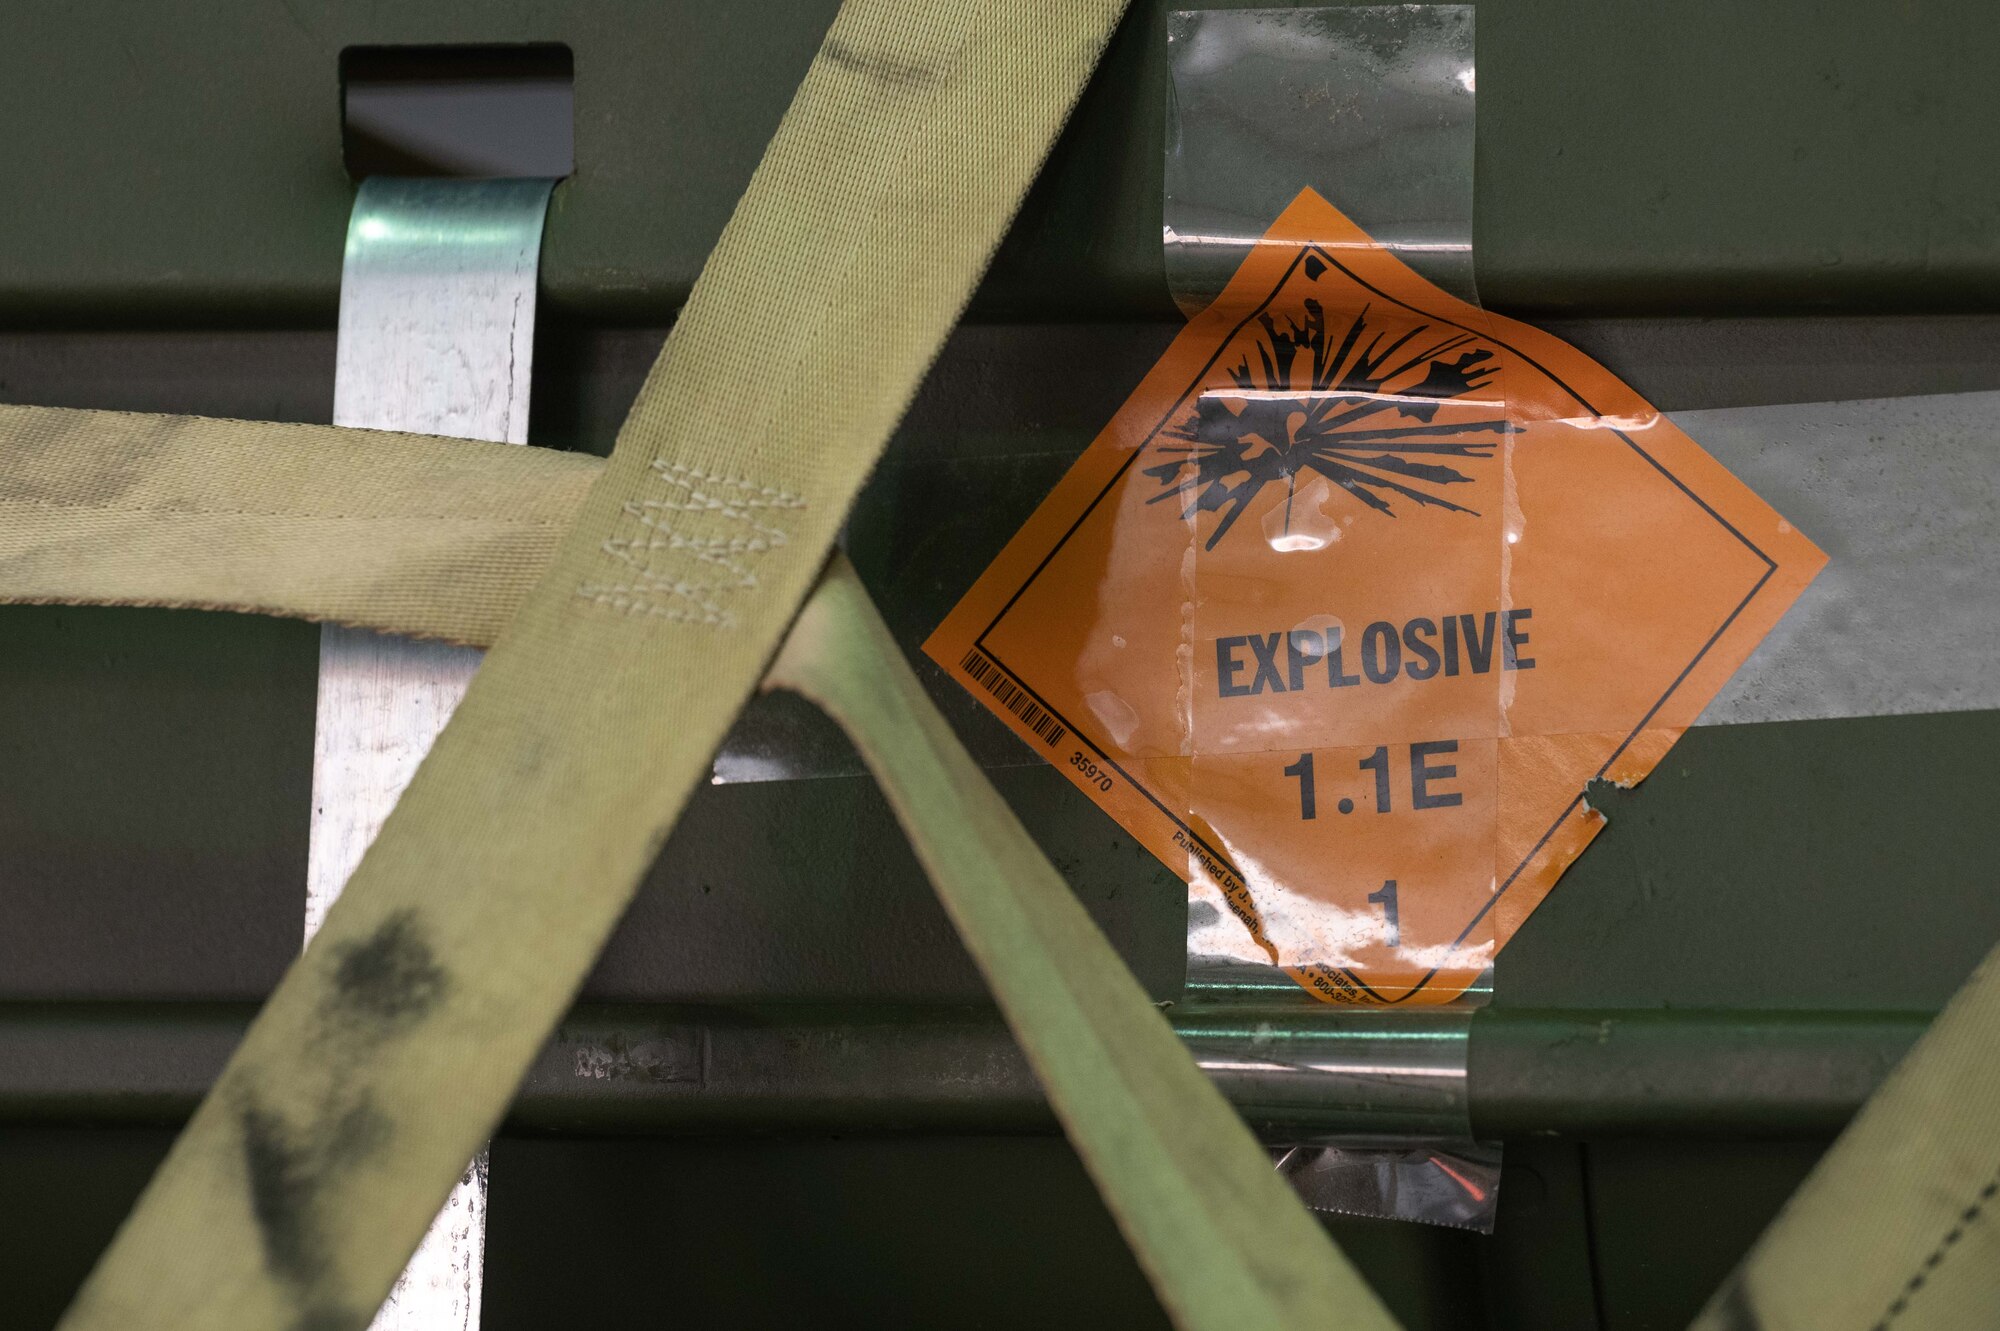 An "explosive" sticker is on a pallet